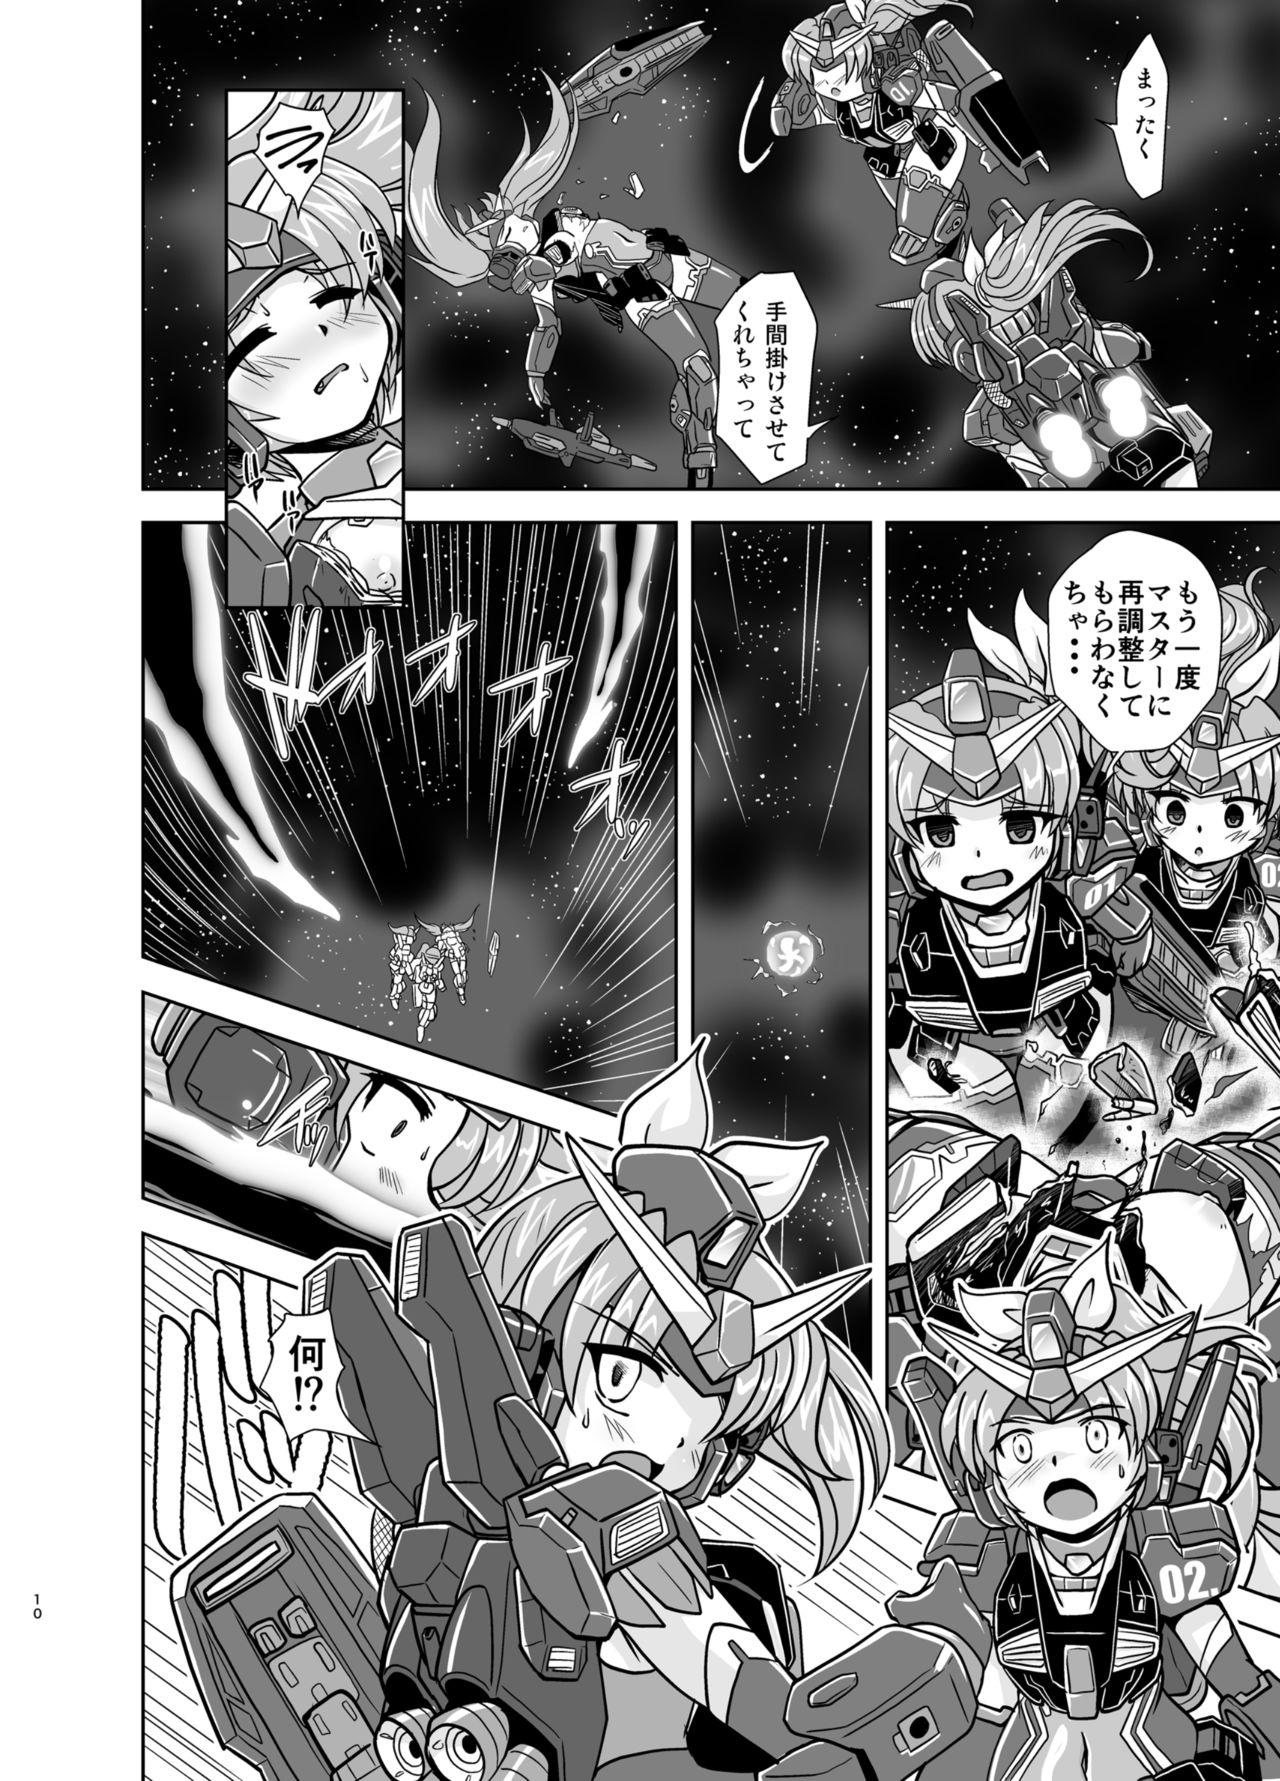 Colombia GH - Mobile suit gundam Gay Friend - Page 10